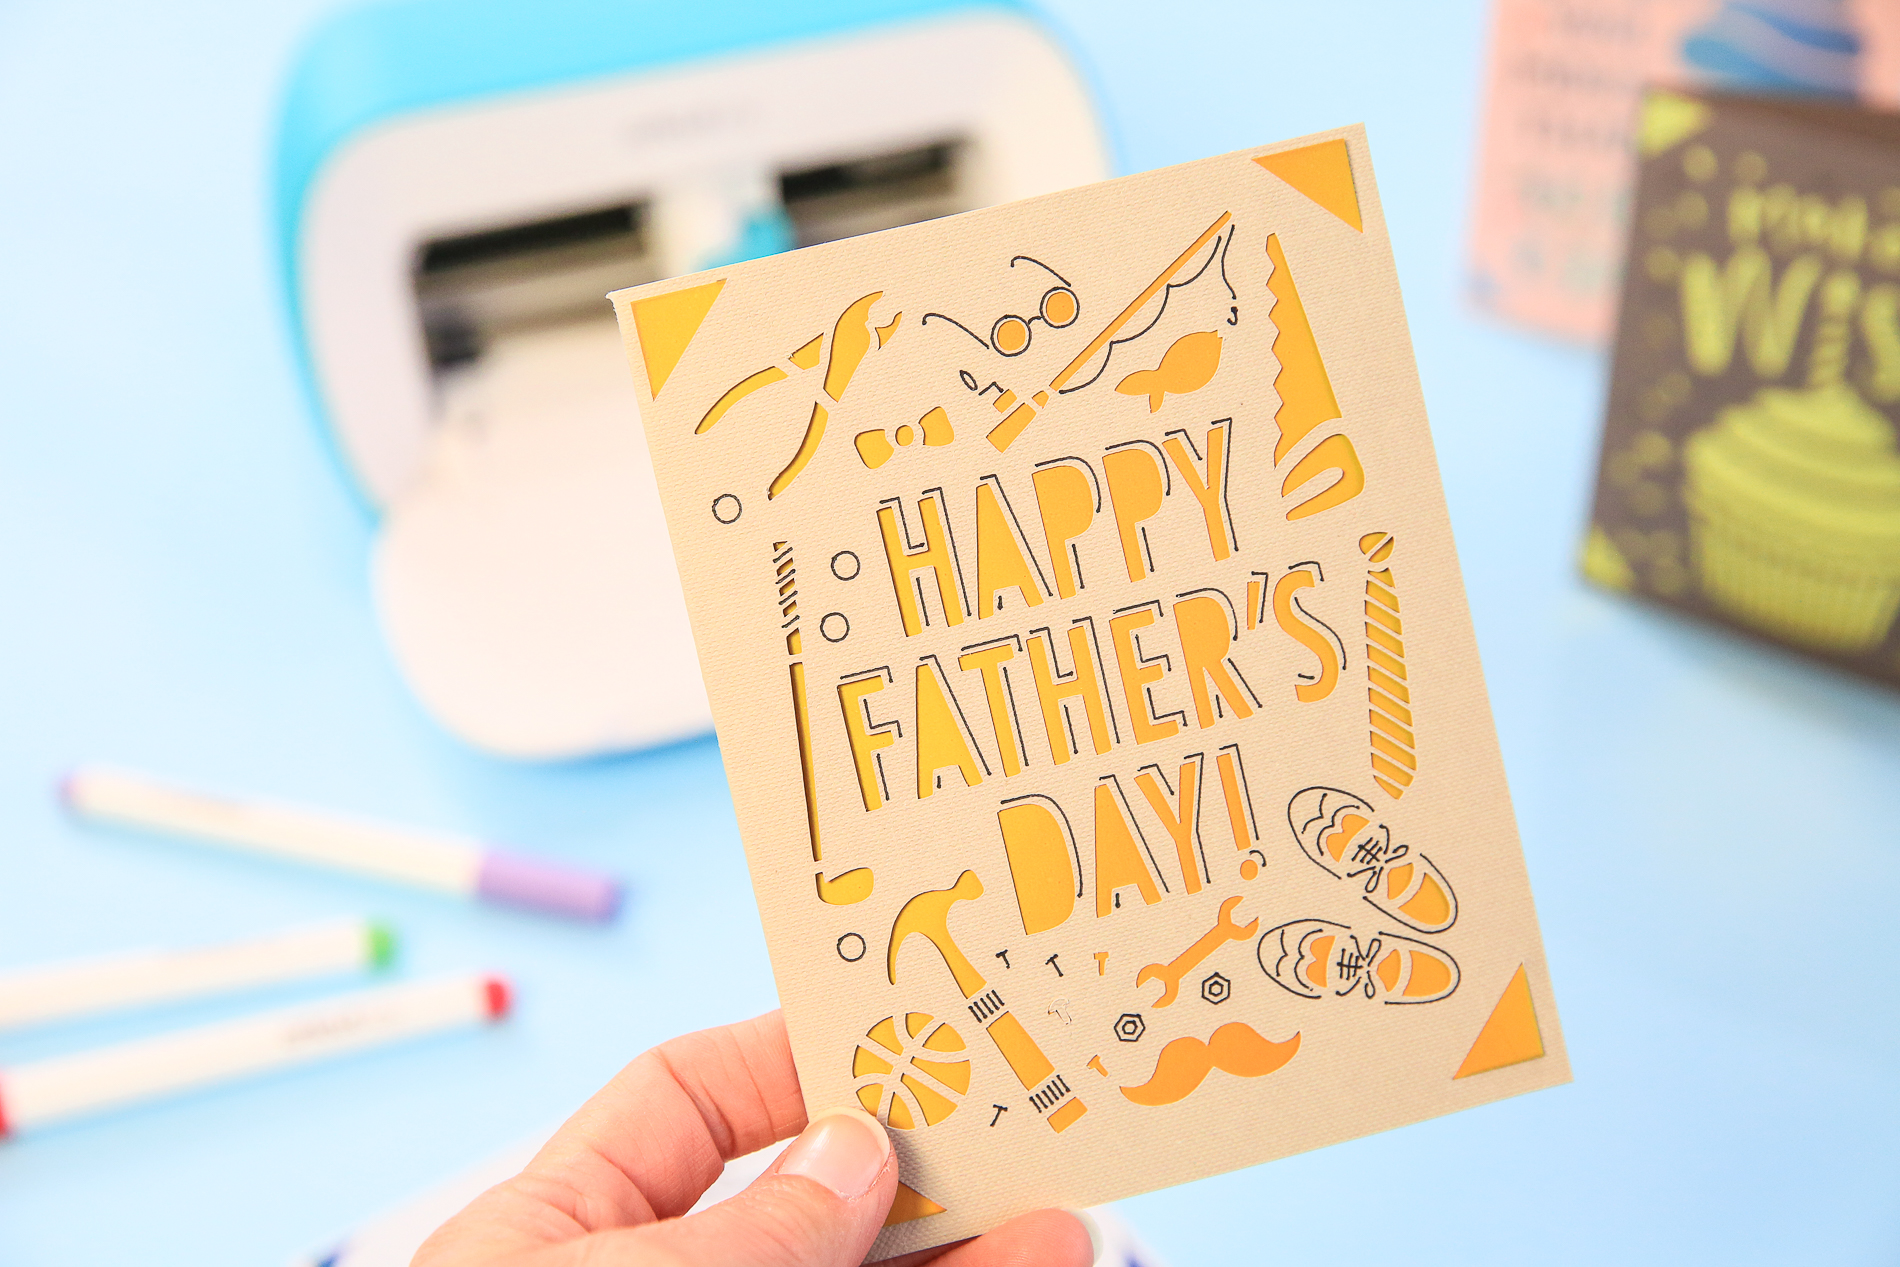 Cricut Joy Fathers Day Card | One cut card for dad. Easy craft! | Cricut crafting with Kim Byers at TheCelebrationShoppe